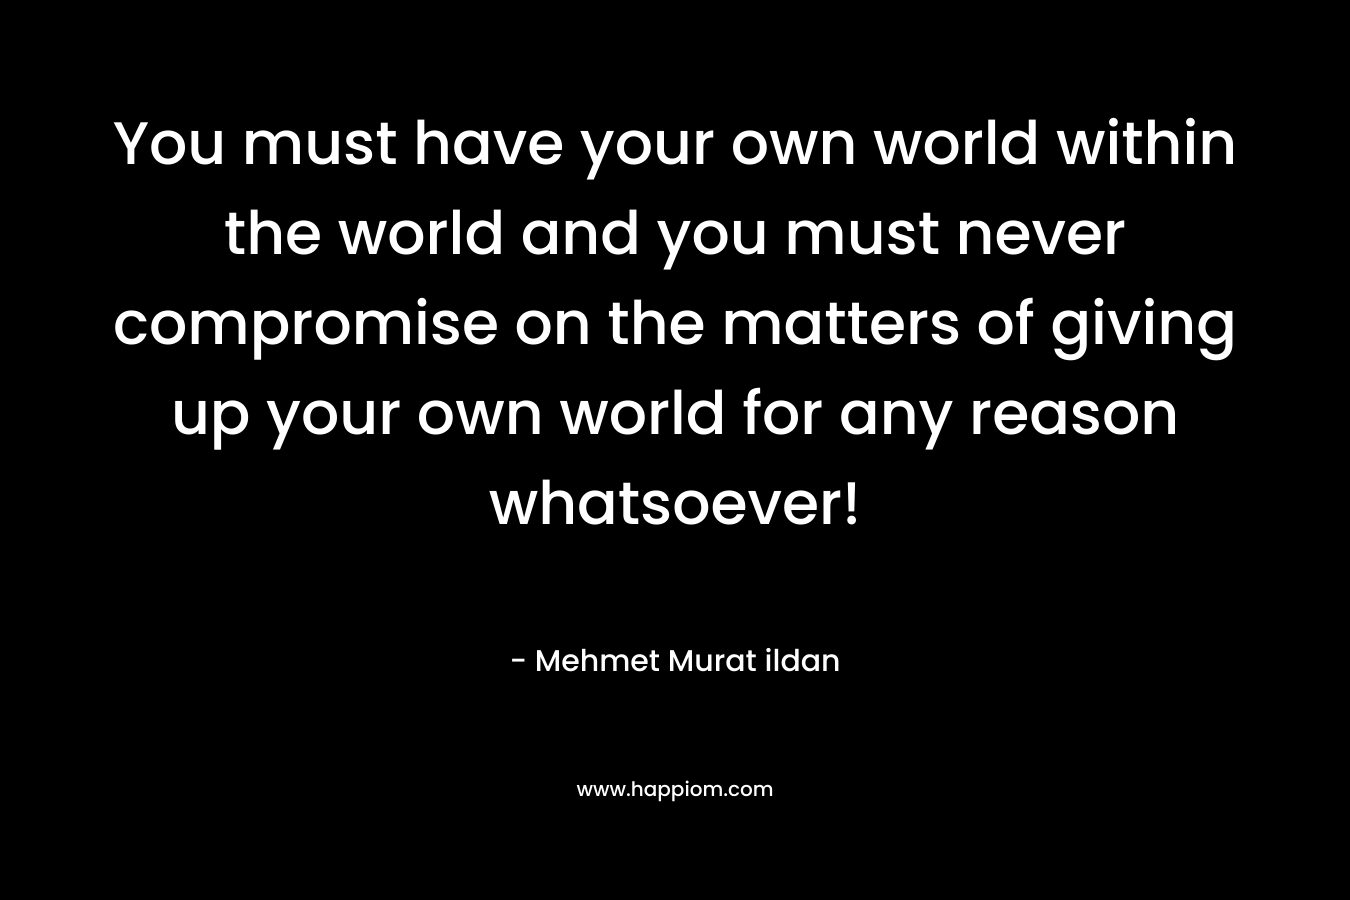 You must have your own world within the world and you must never compromise on the matters of giving up your own world for any reason whatsoever!